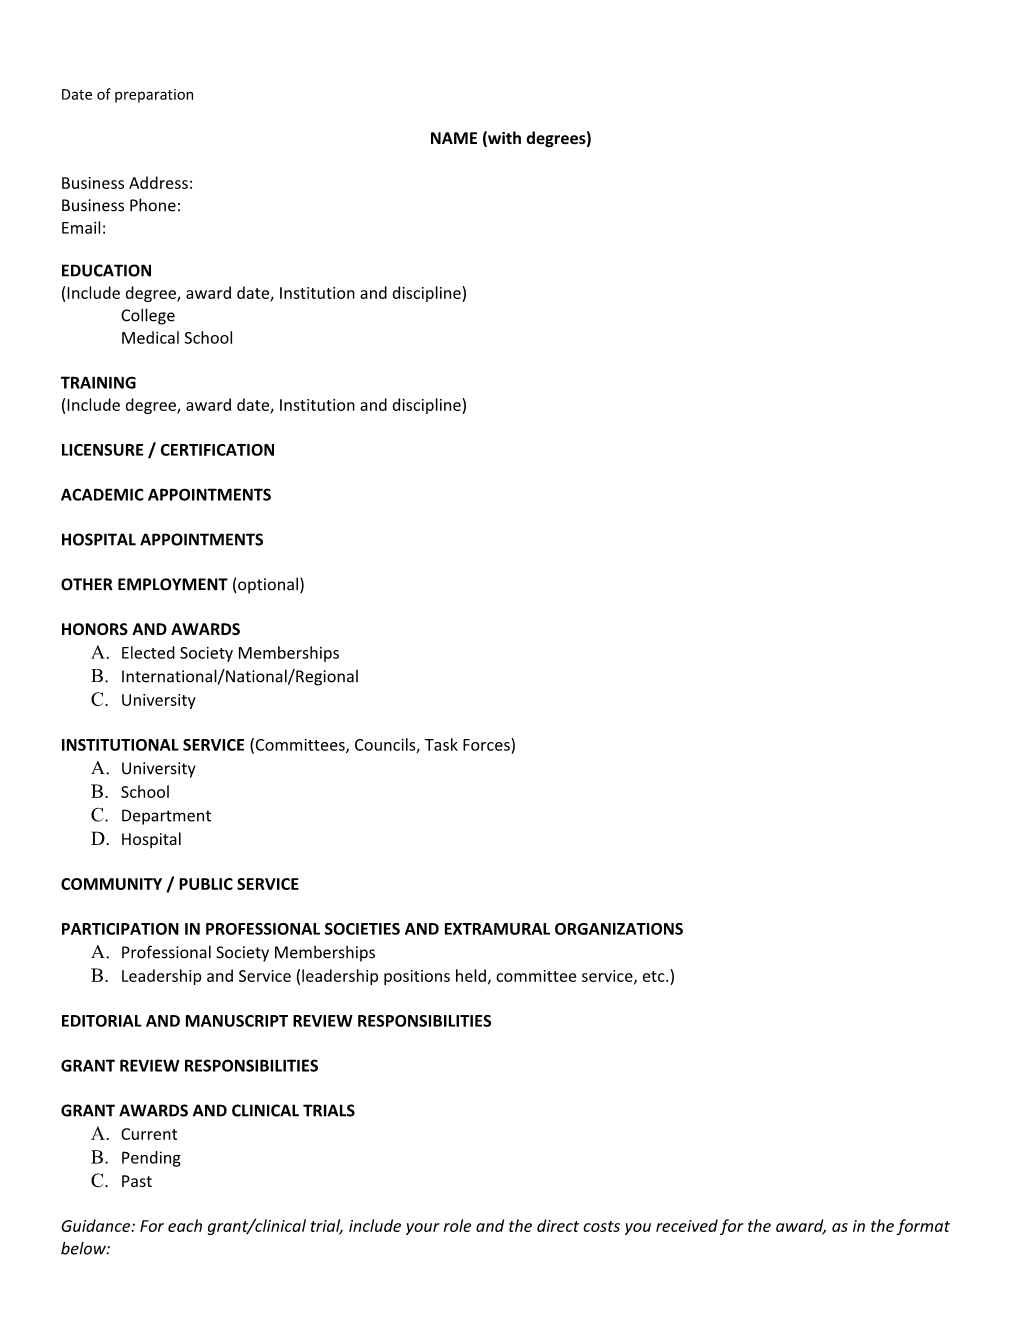 Standardized Curriculum Vitae for Faculty Actions